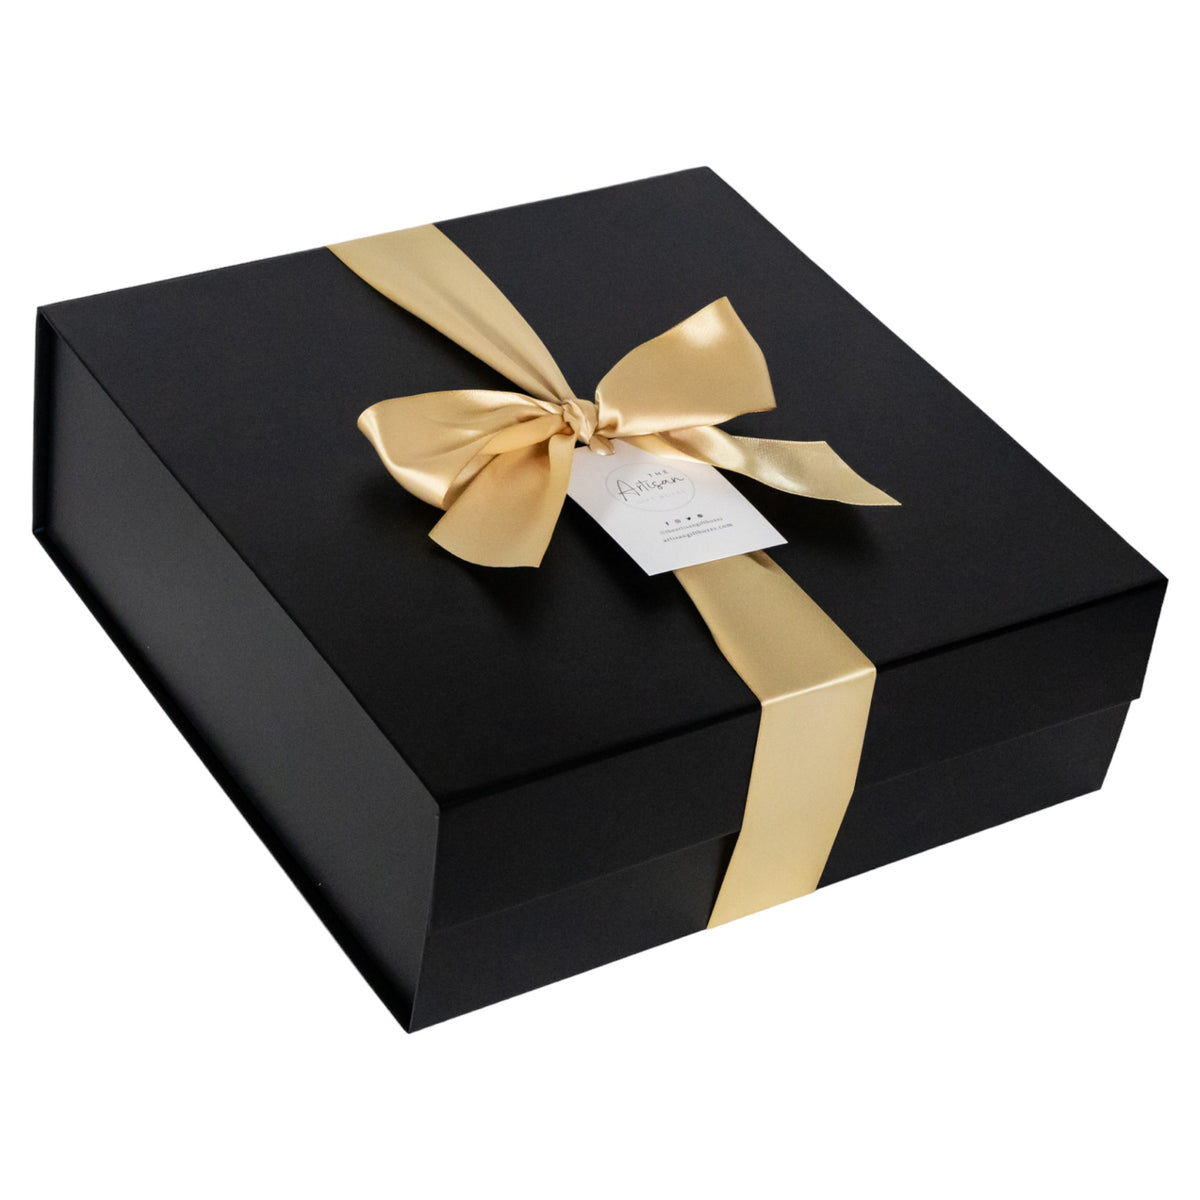 Find Personalized Corporate Gifts – The Artisan Gift Boxes